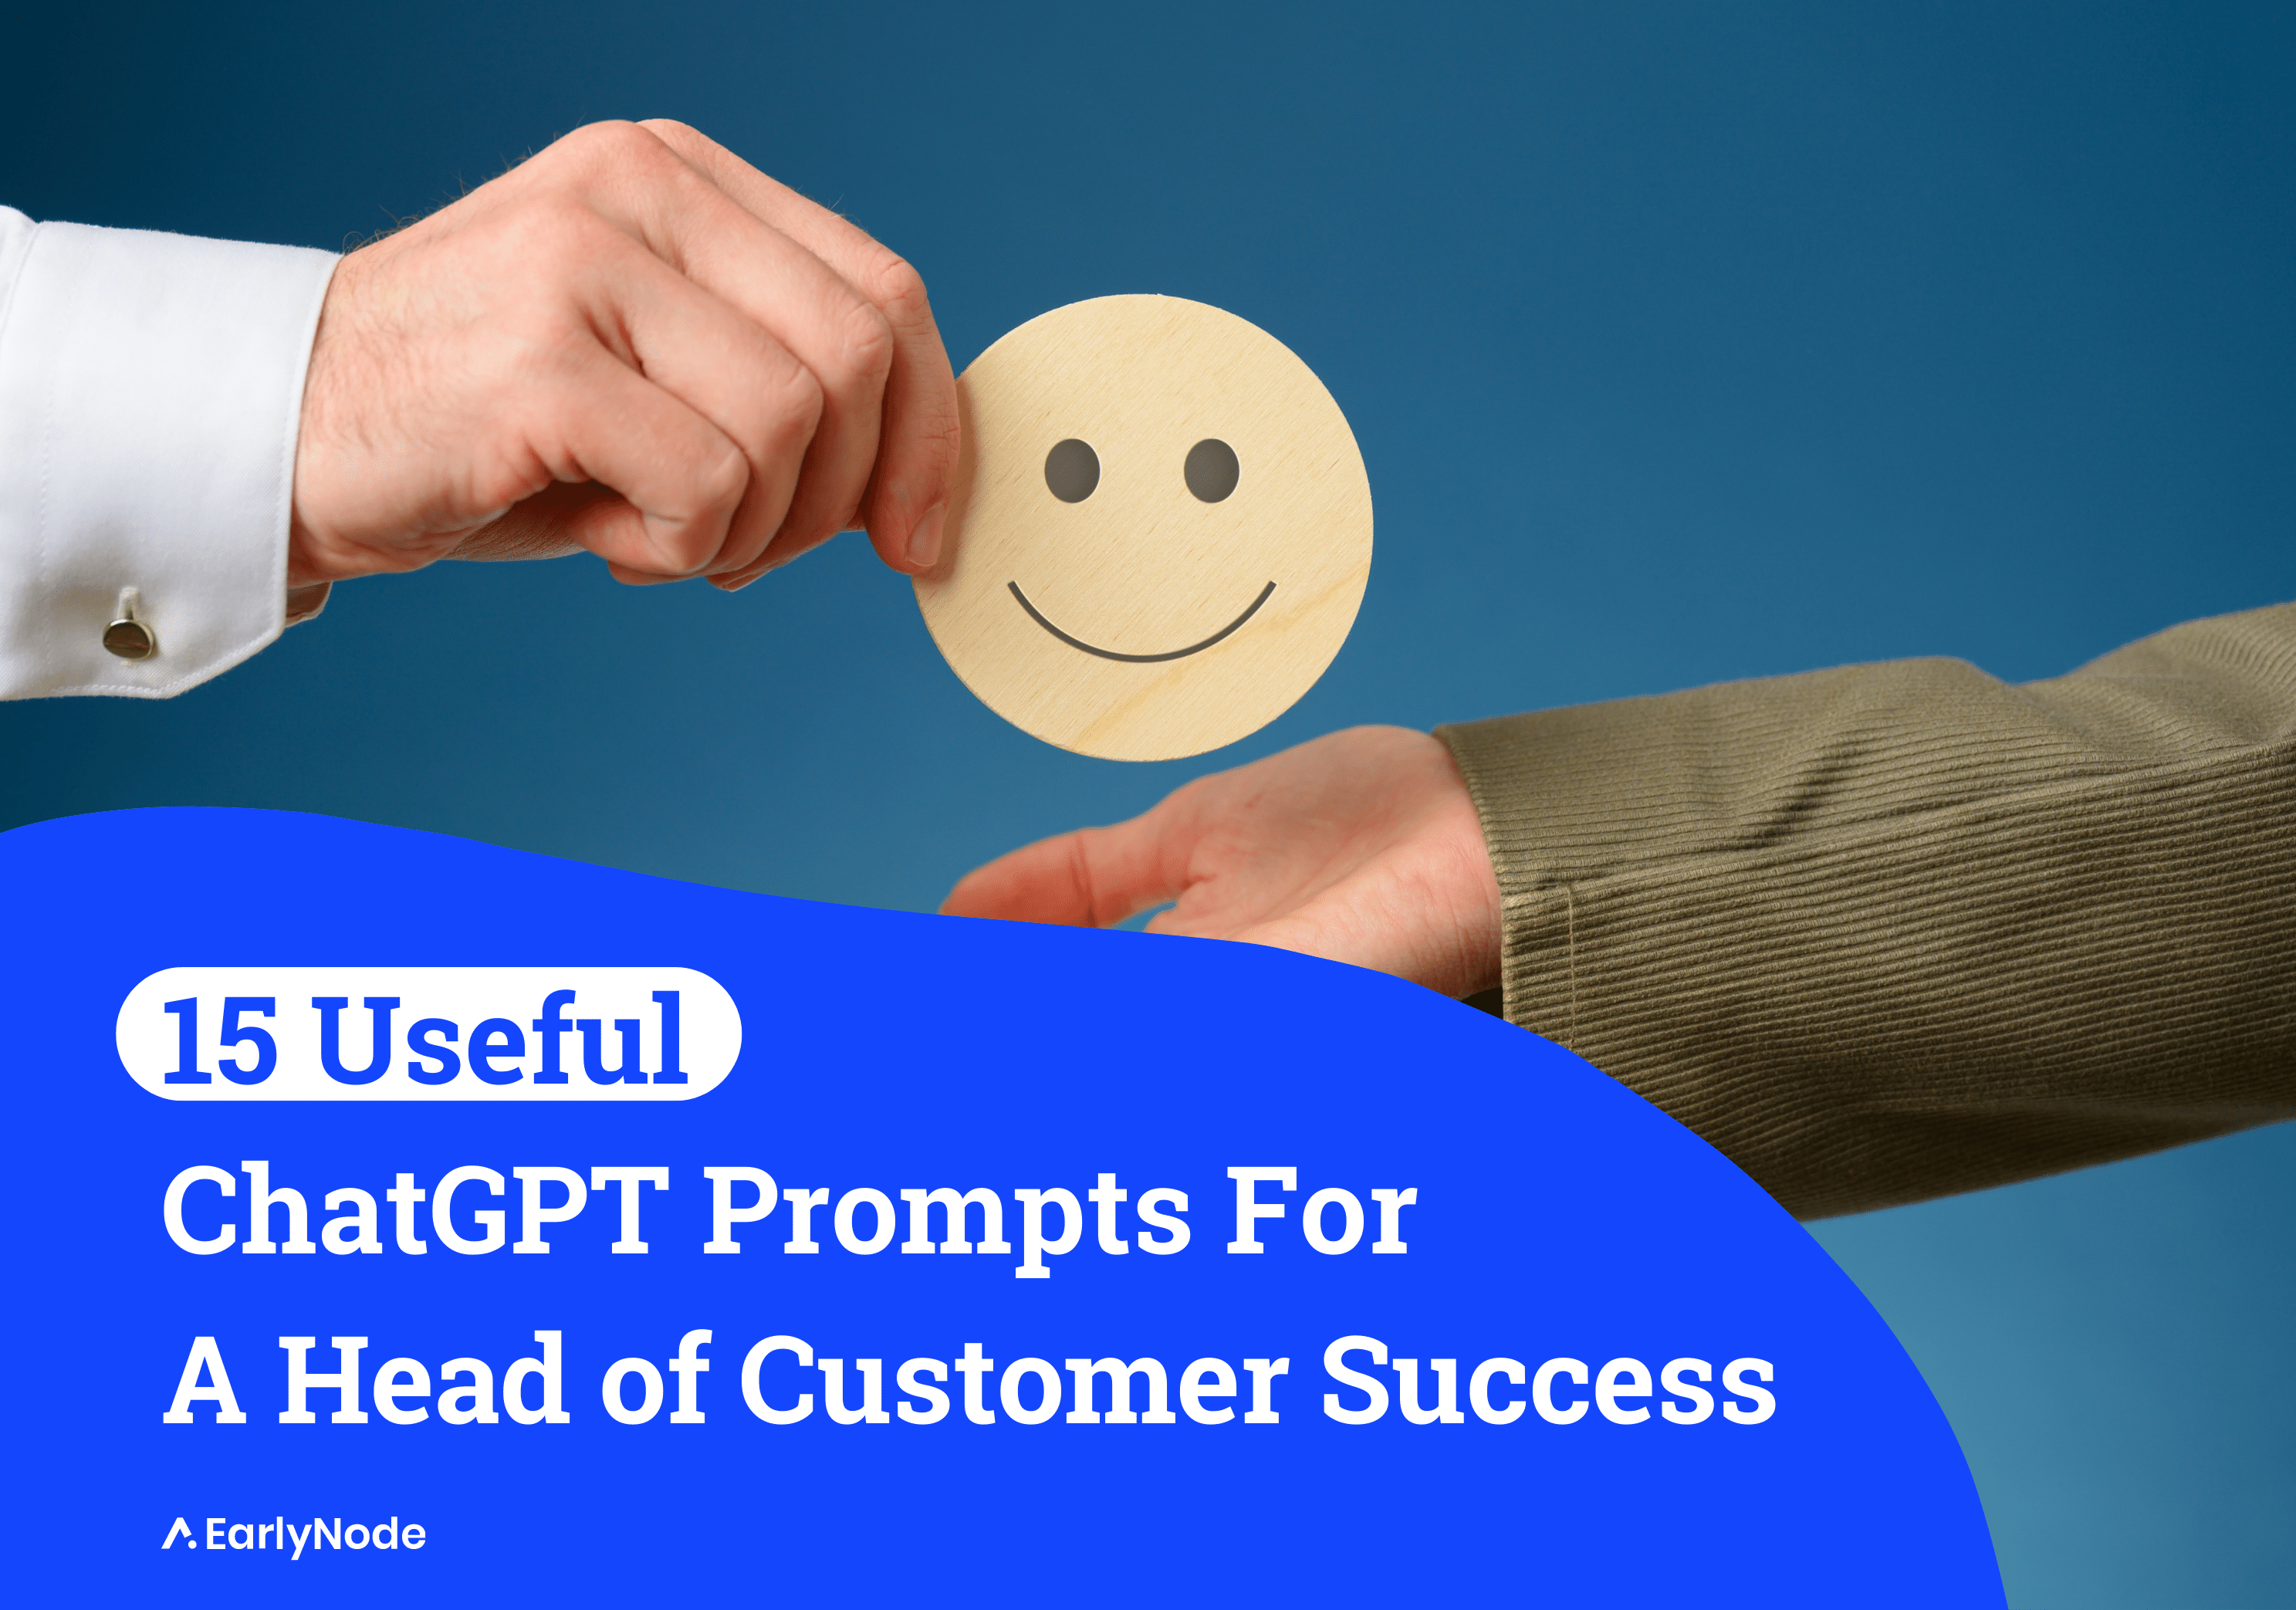 15 ChatGPT Prompts For Head of Customer Success